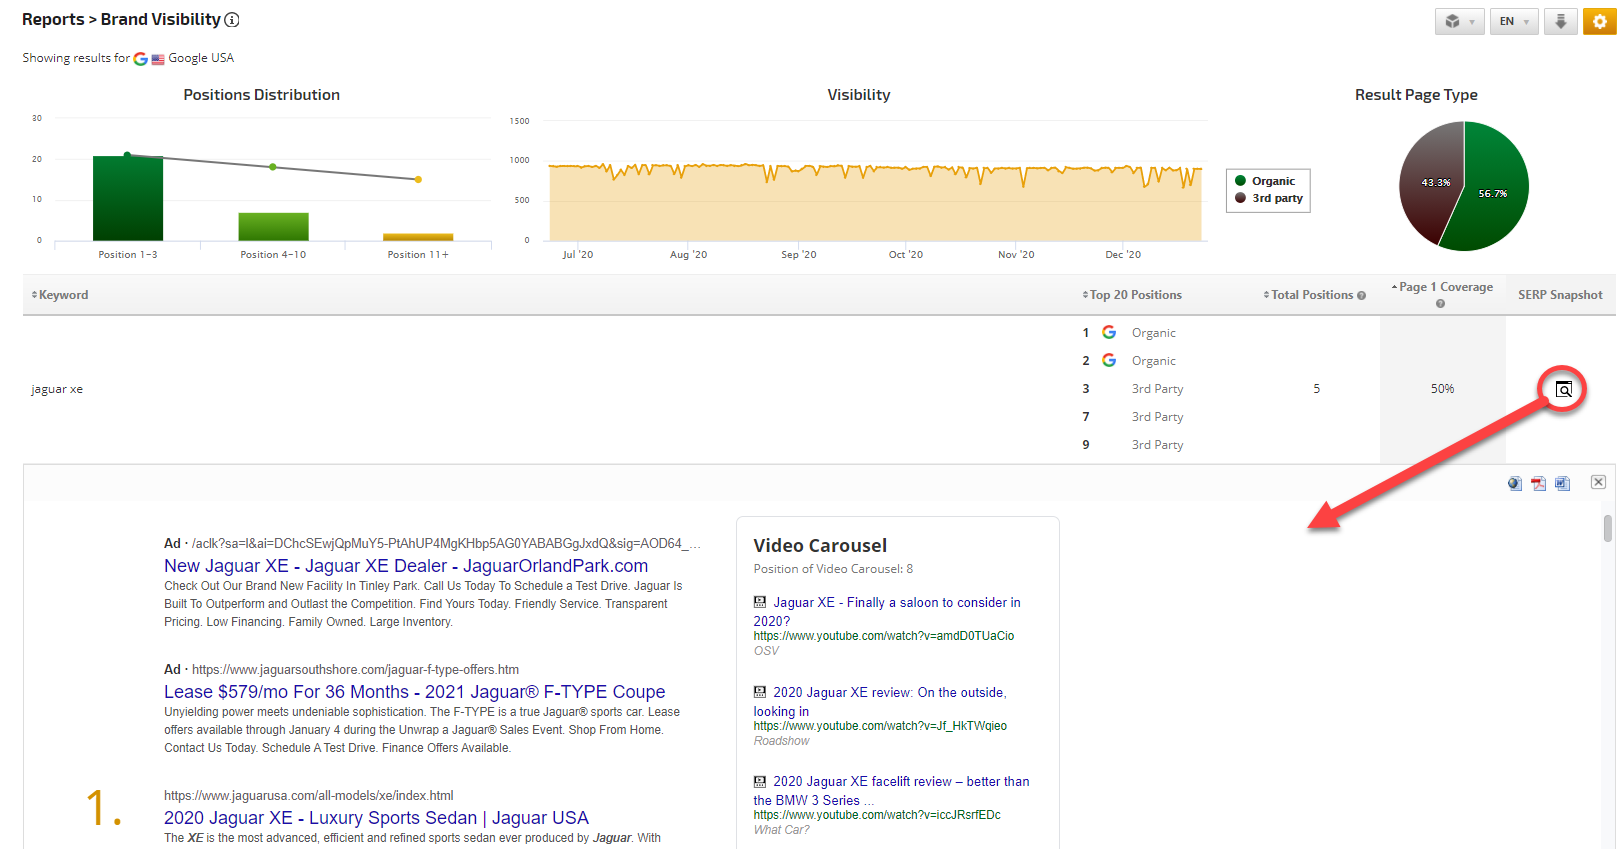 SERP Snapshot of Brand Visibility